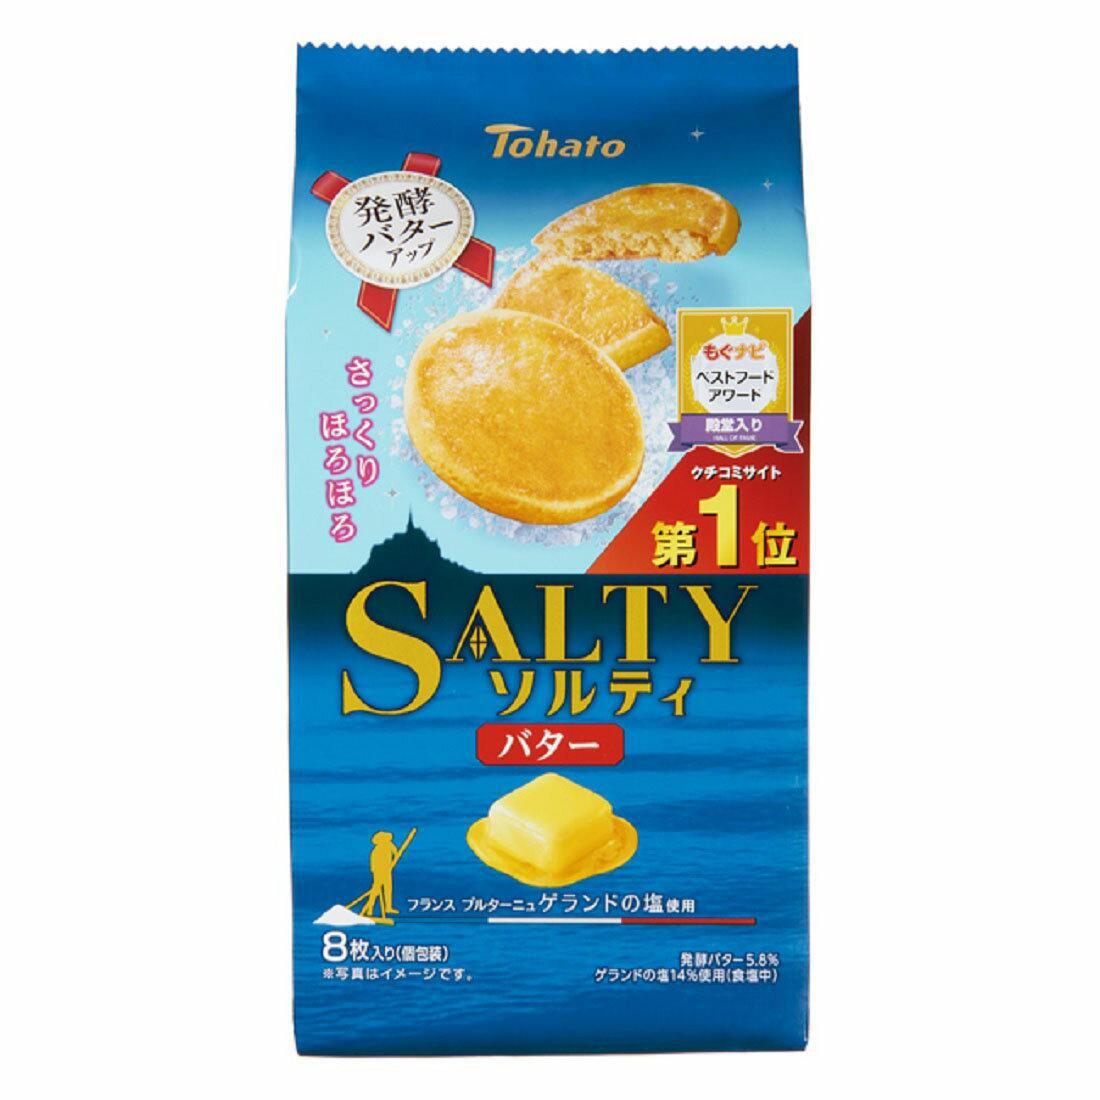 Tohato Salty Salted Butter Biscuits 8 Pieces (Box of 12)